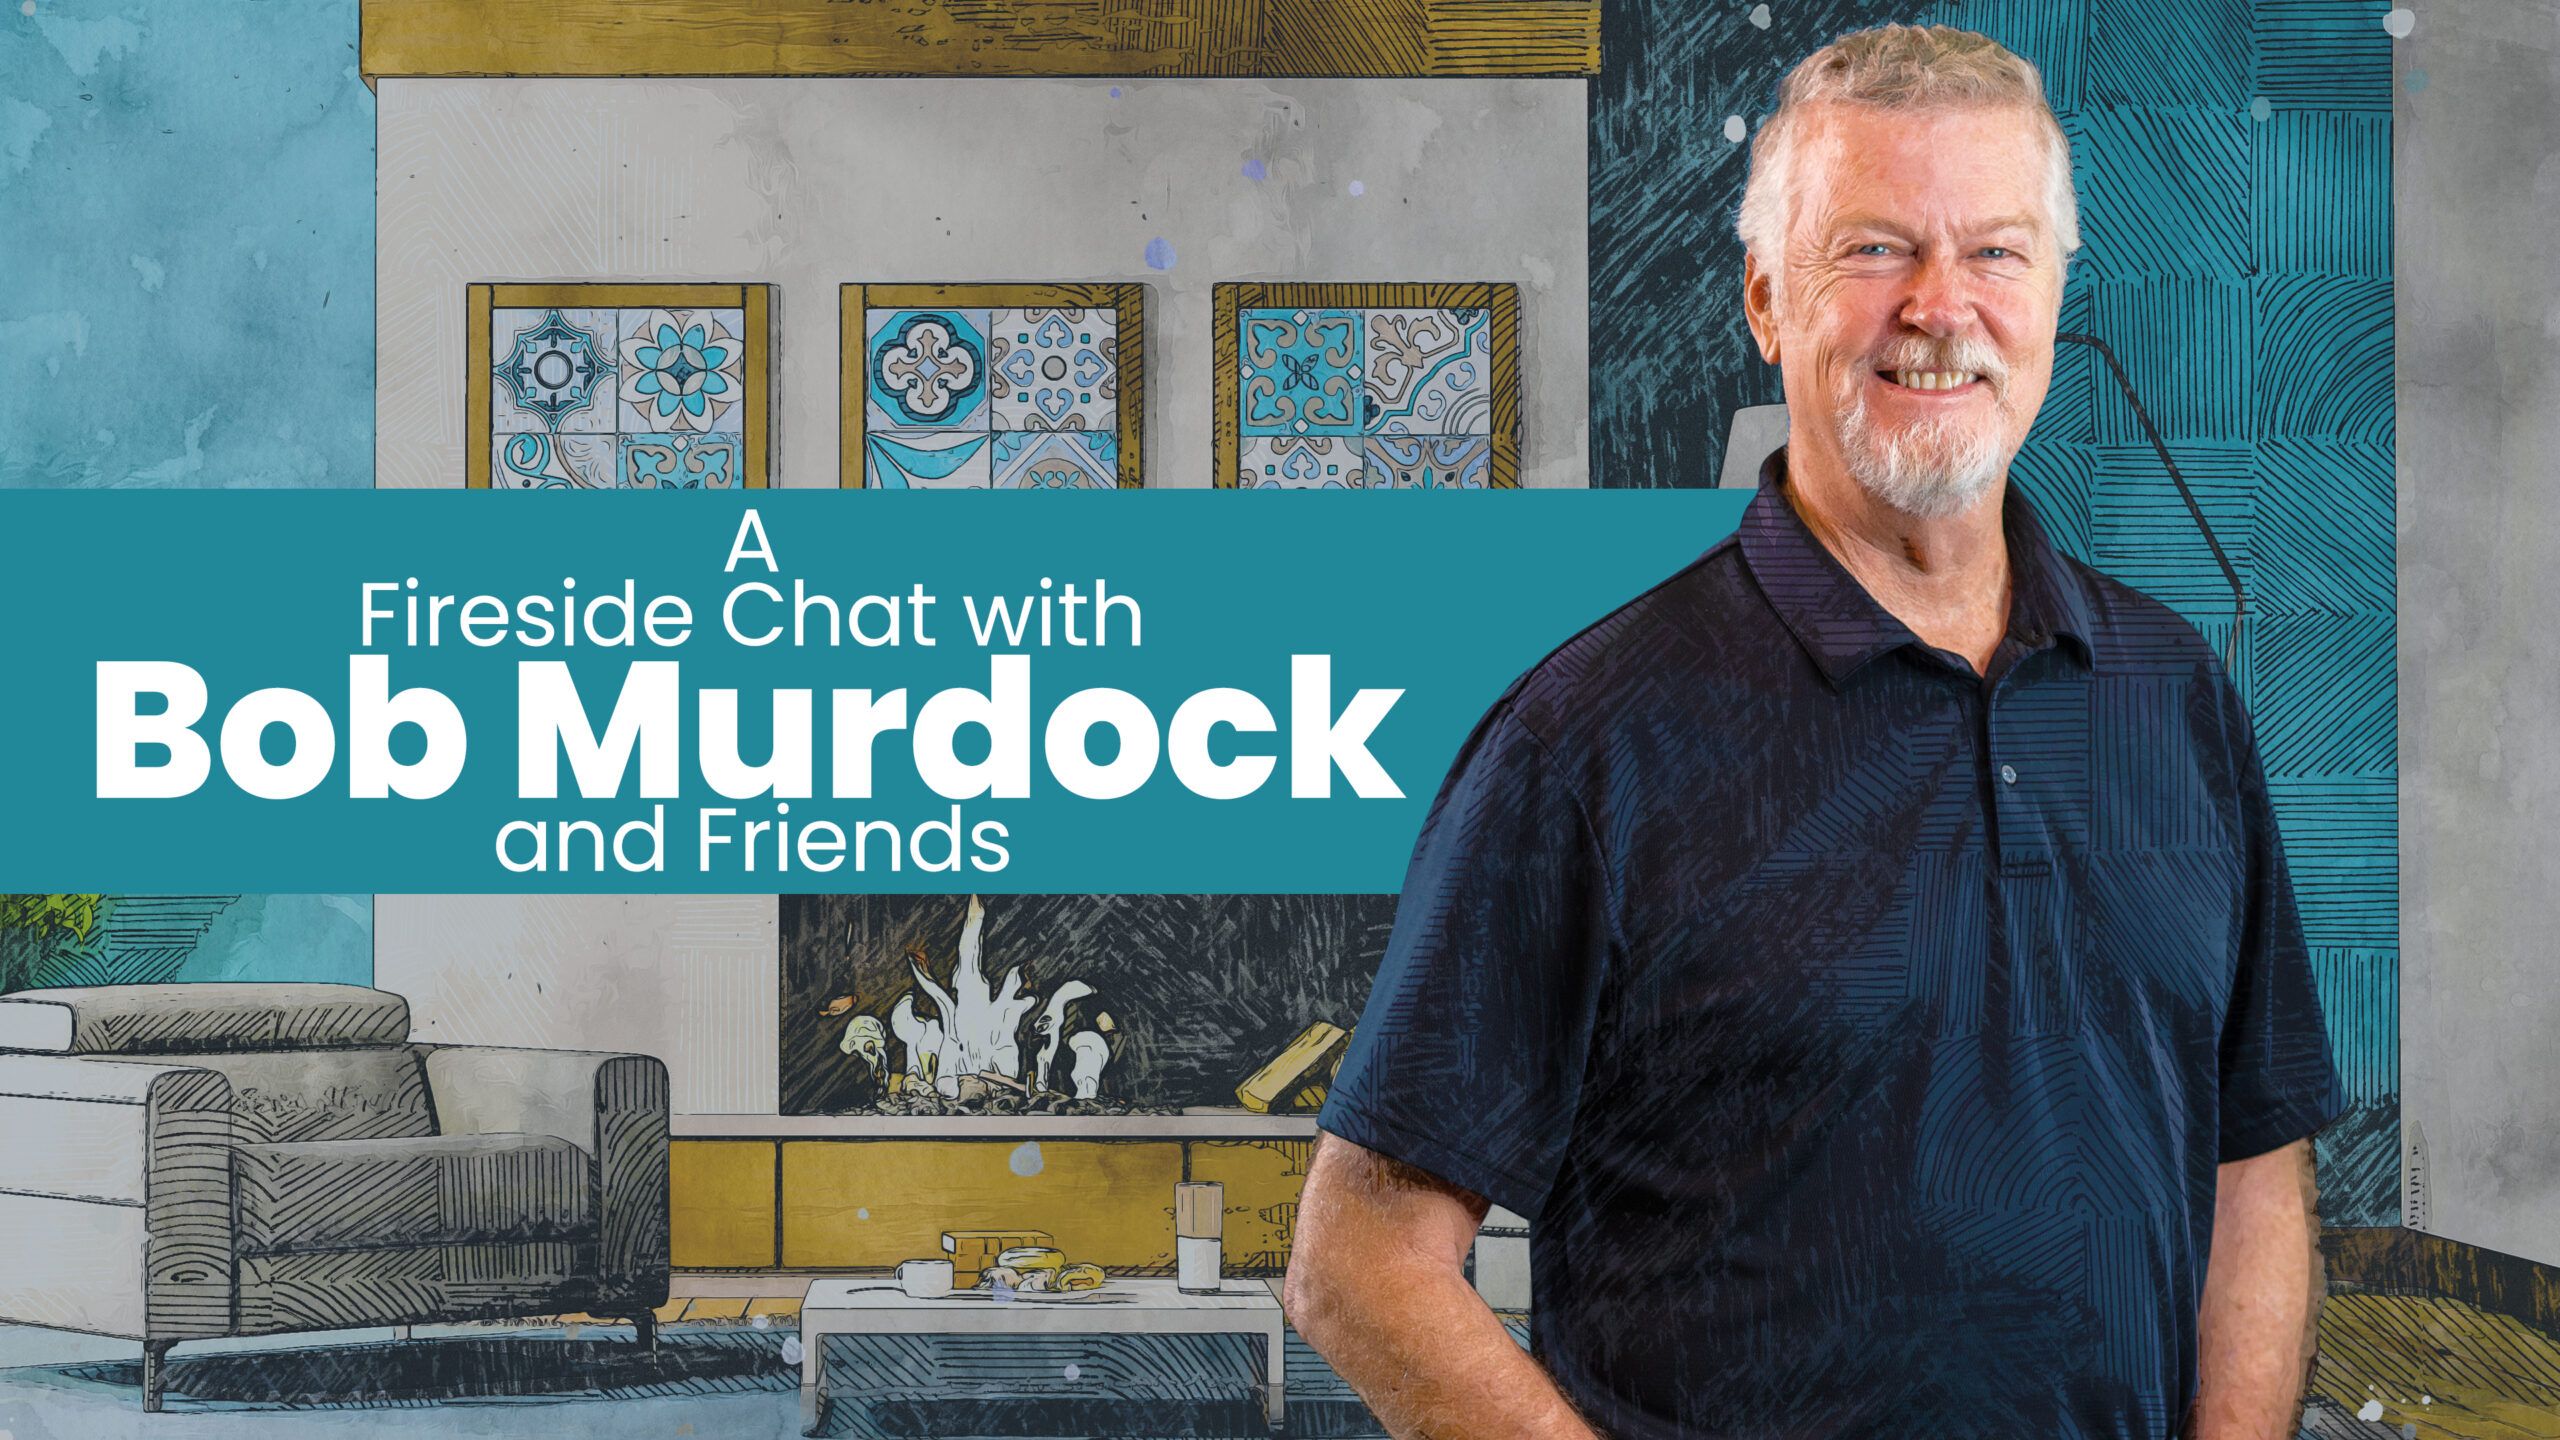 Bob murdock and friends - freeside chat with bob murdock and friends.